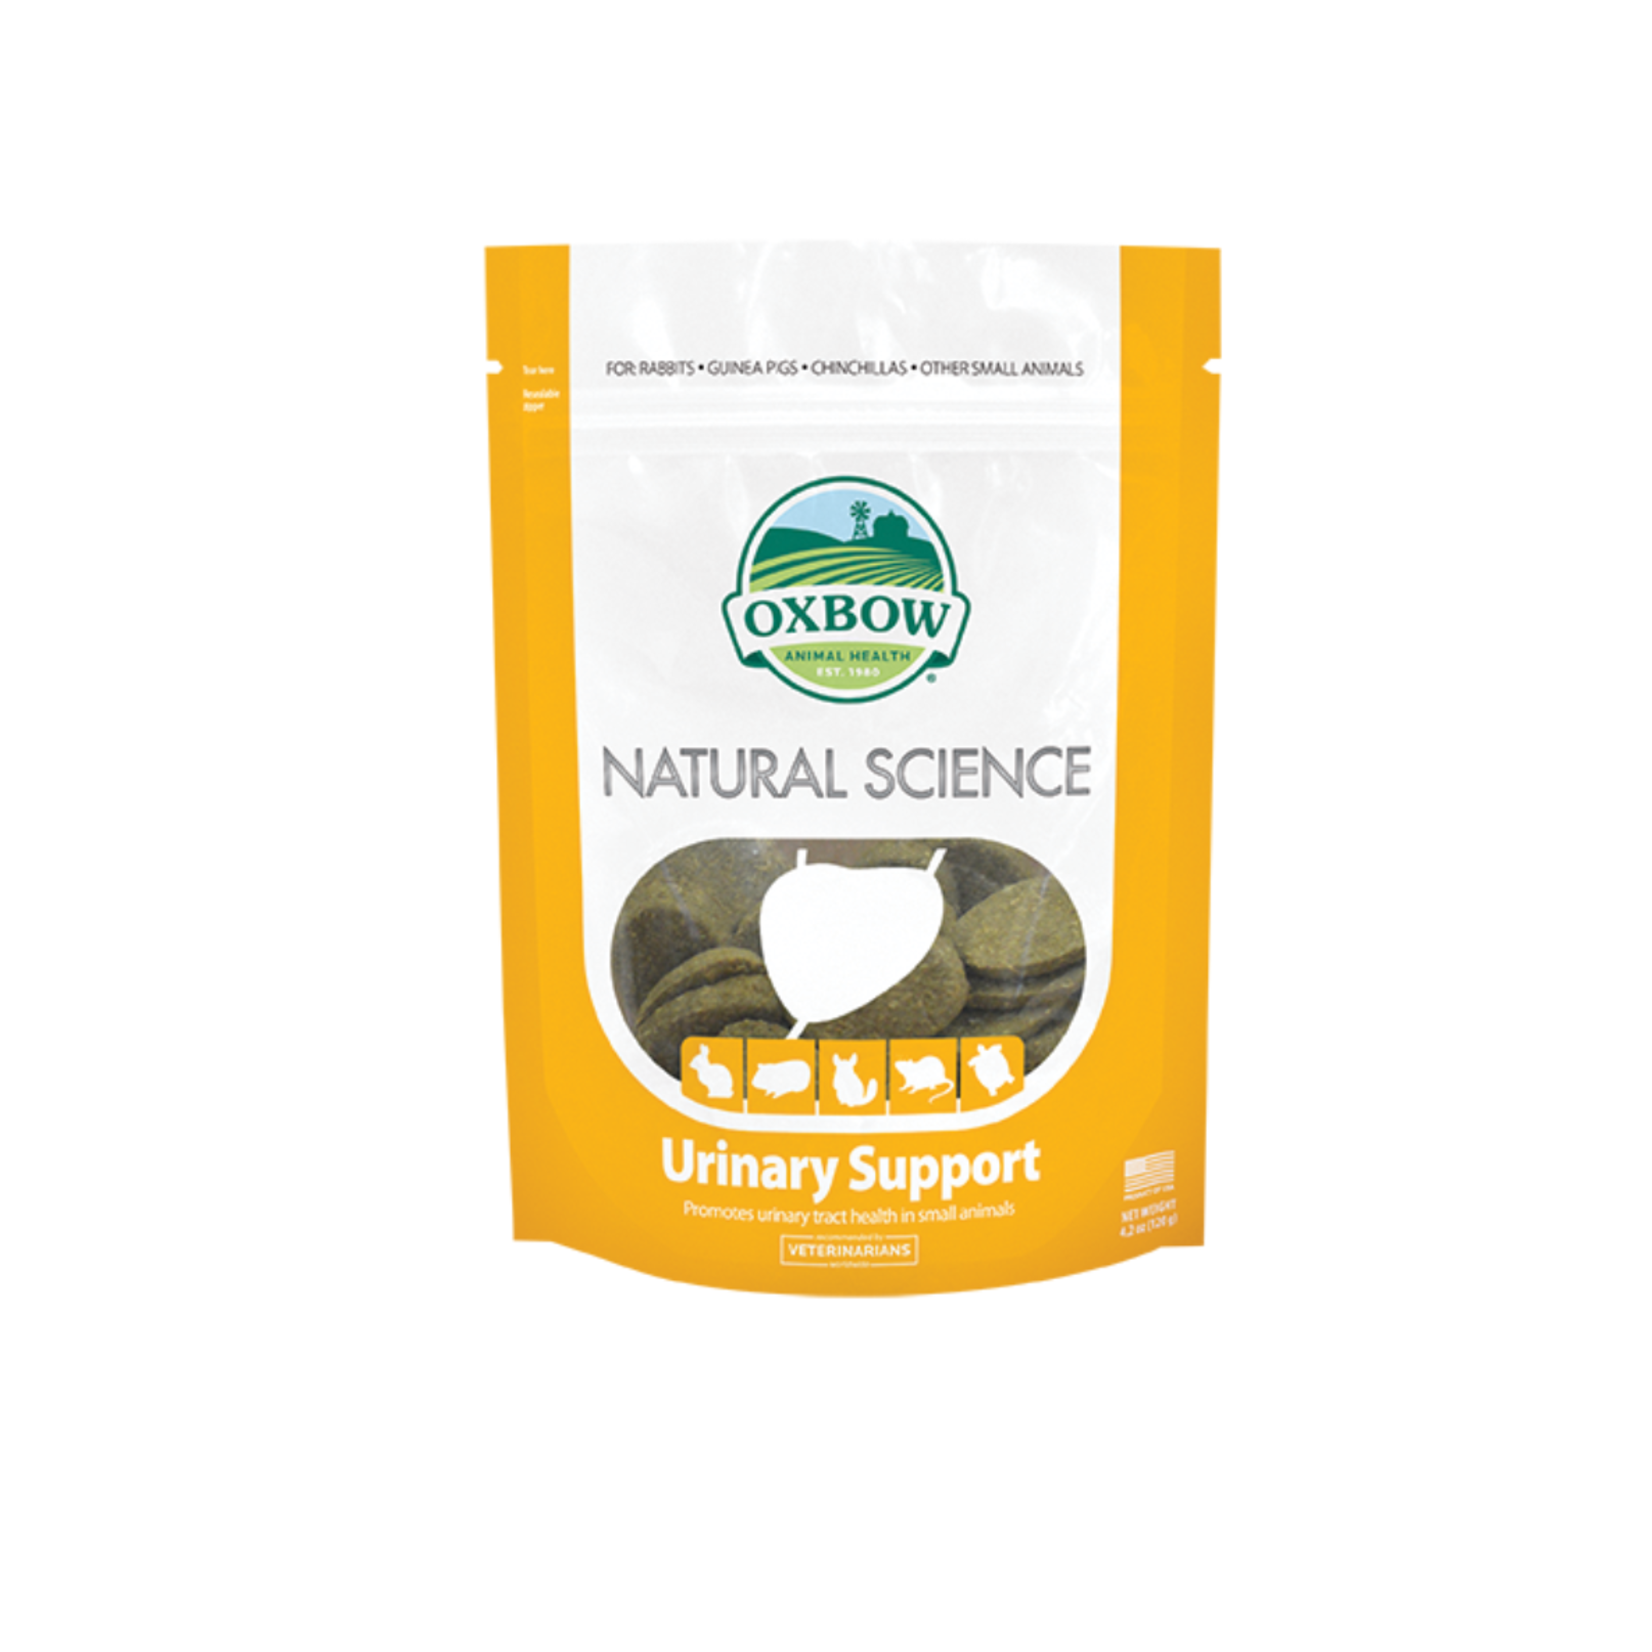 Oxbow Natural Science Supplements for Small Animals Urinary Support, 60 tablets